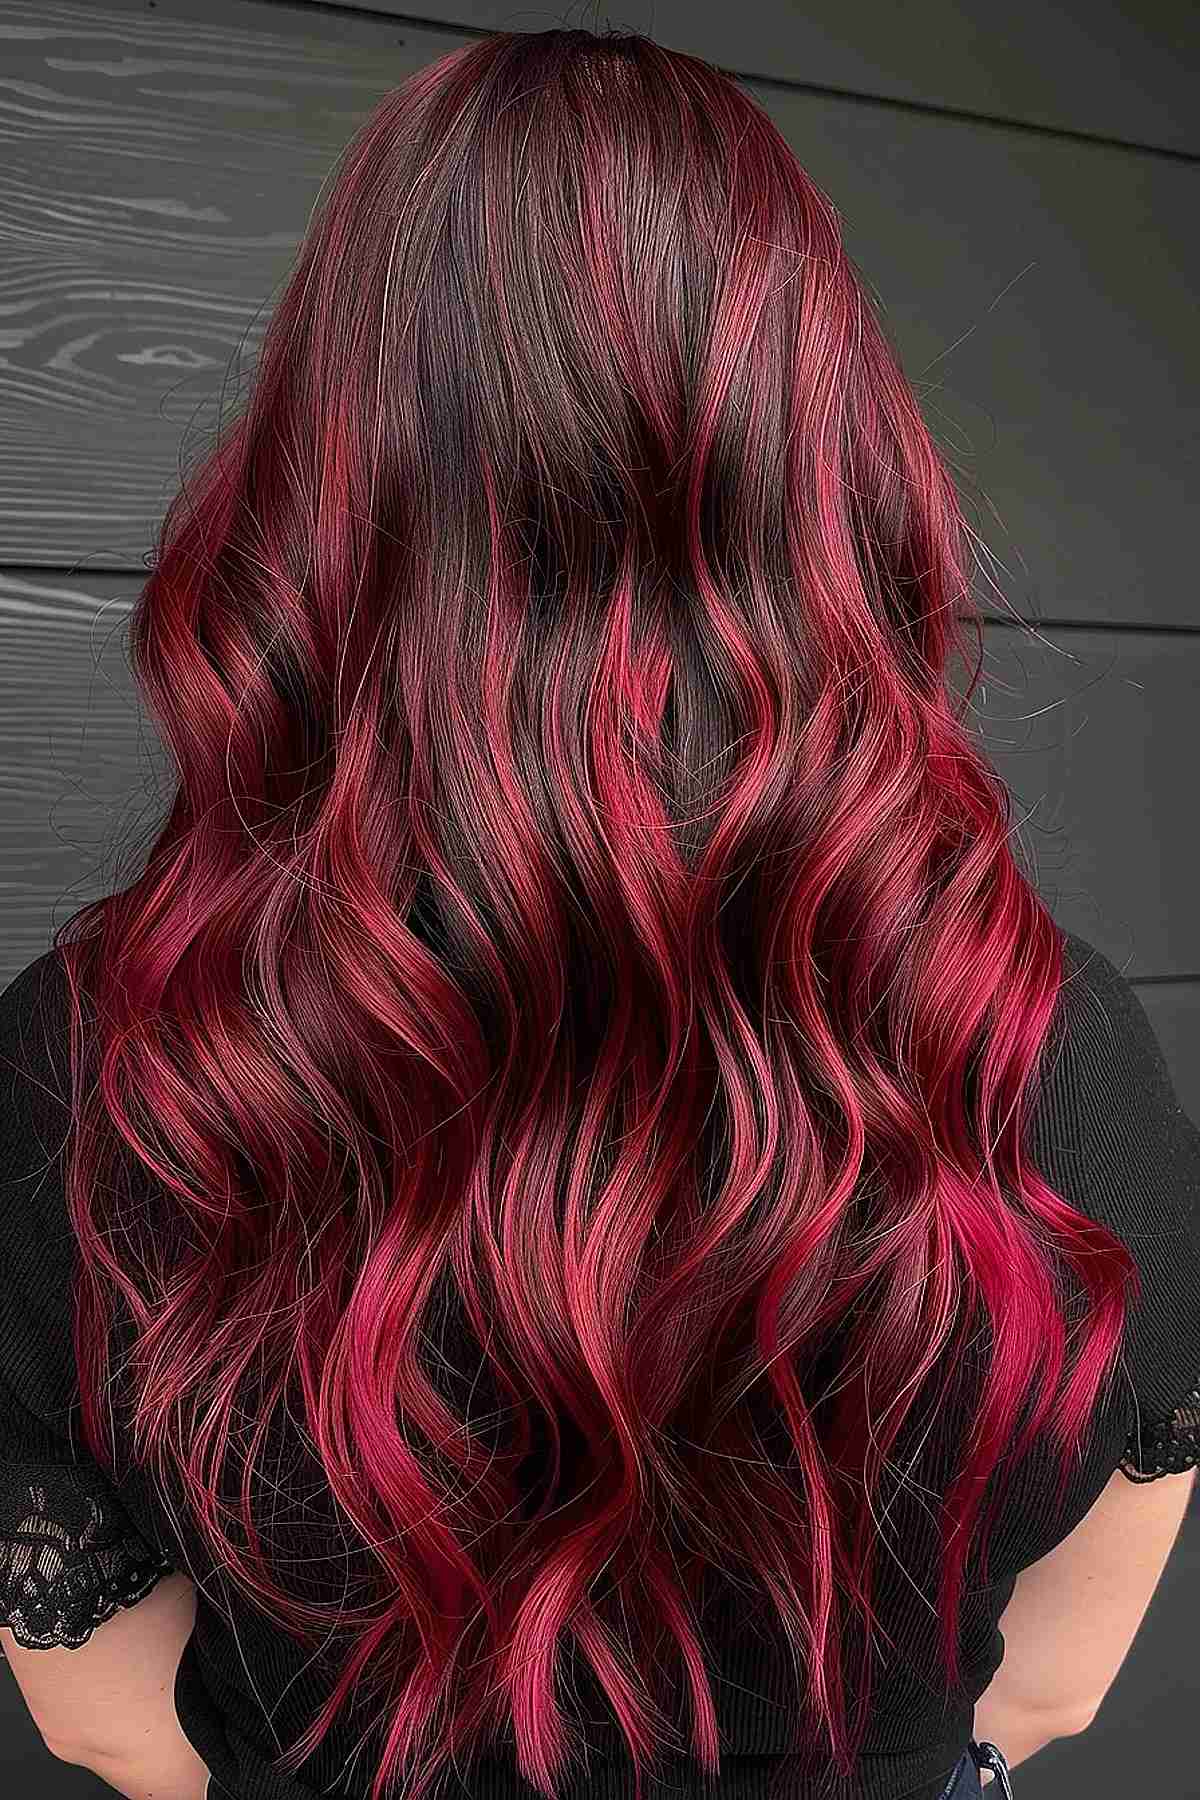 Cherry red balayage on long hair creating a seamless color transition.